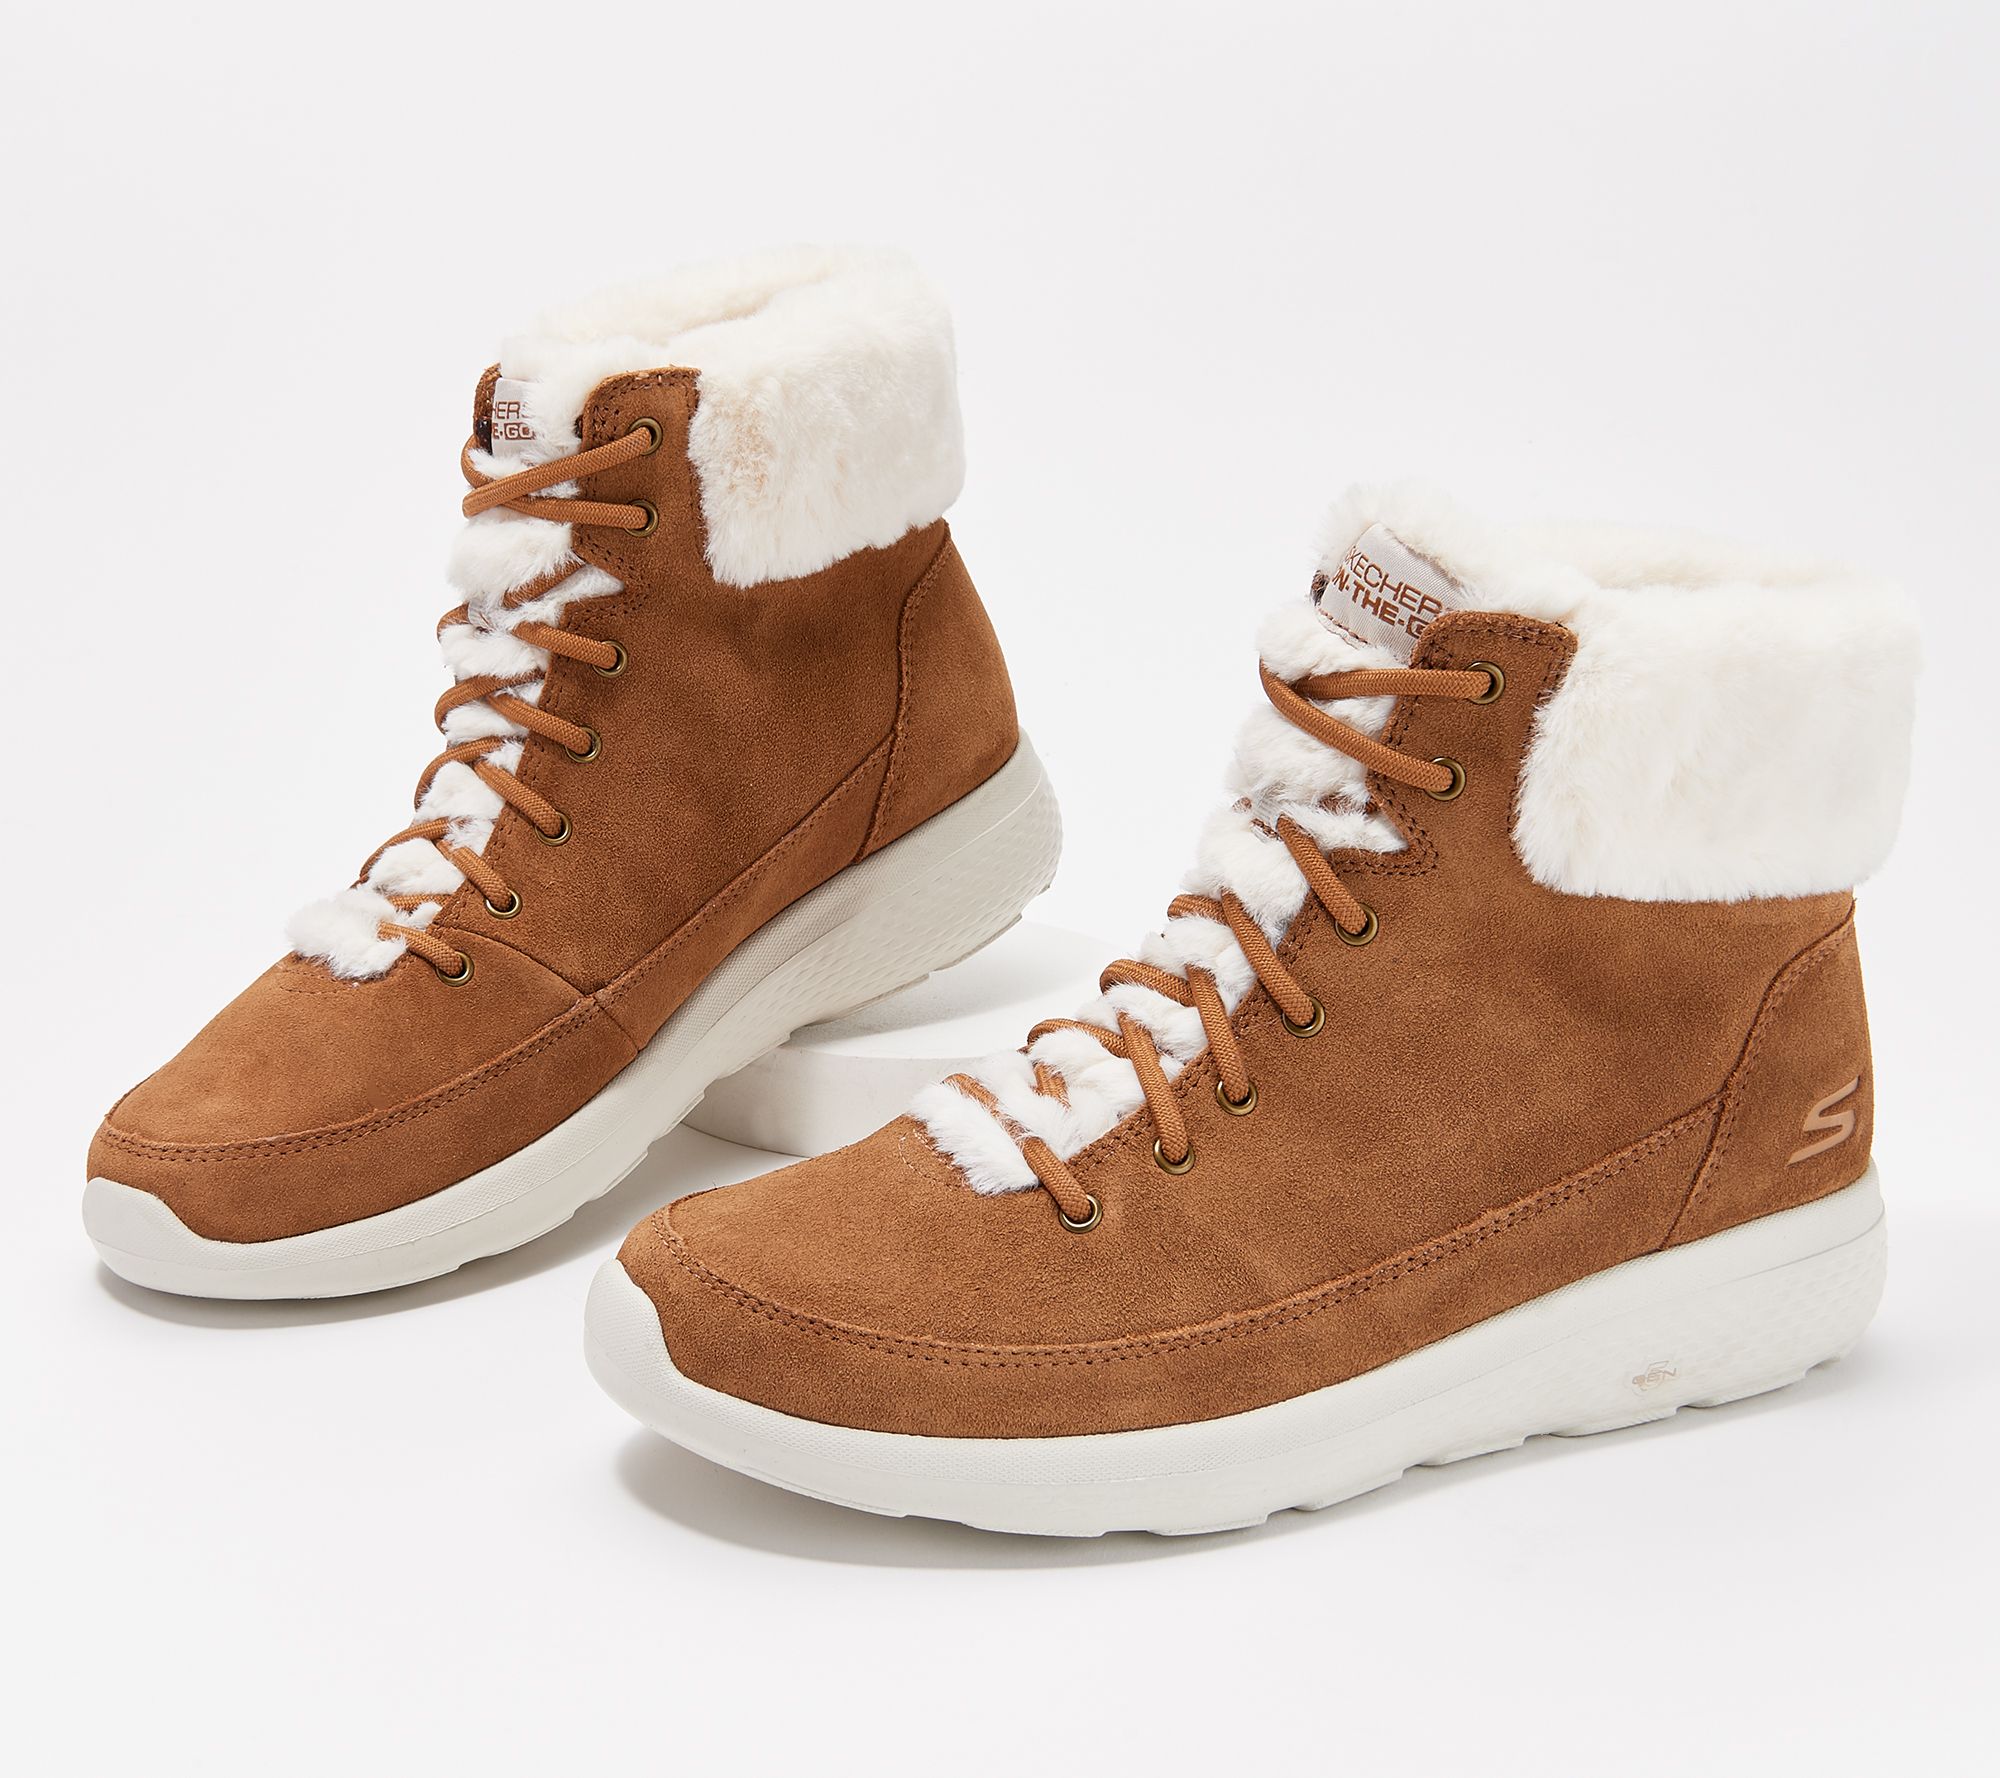 glæde operation forfatter Skechers On-the-Go Water Repellent Suede Boots - Winter Chill - QVC.com